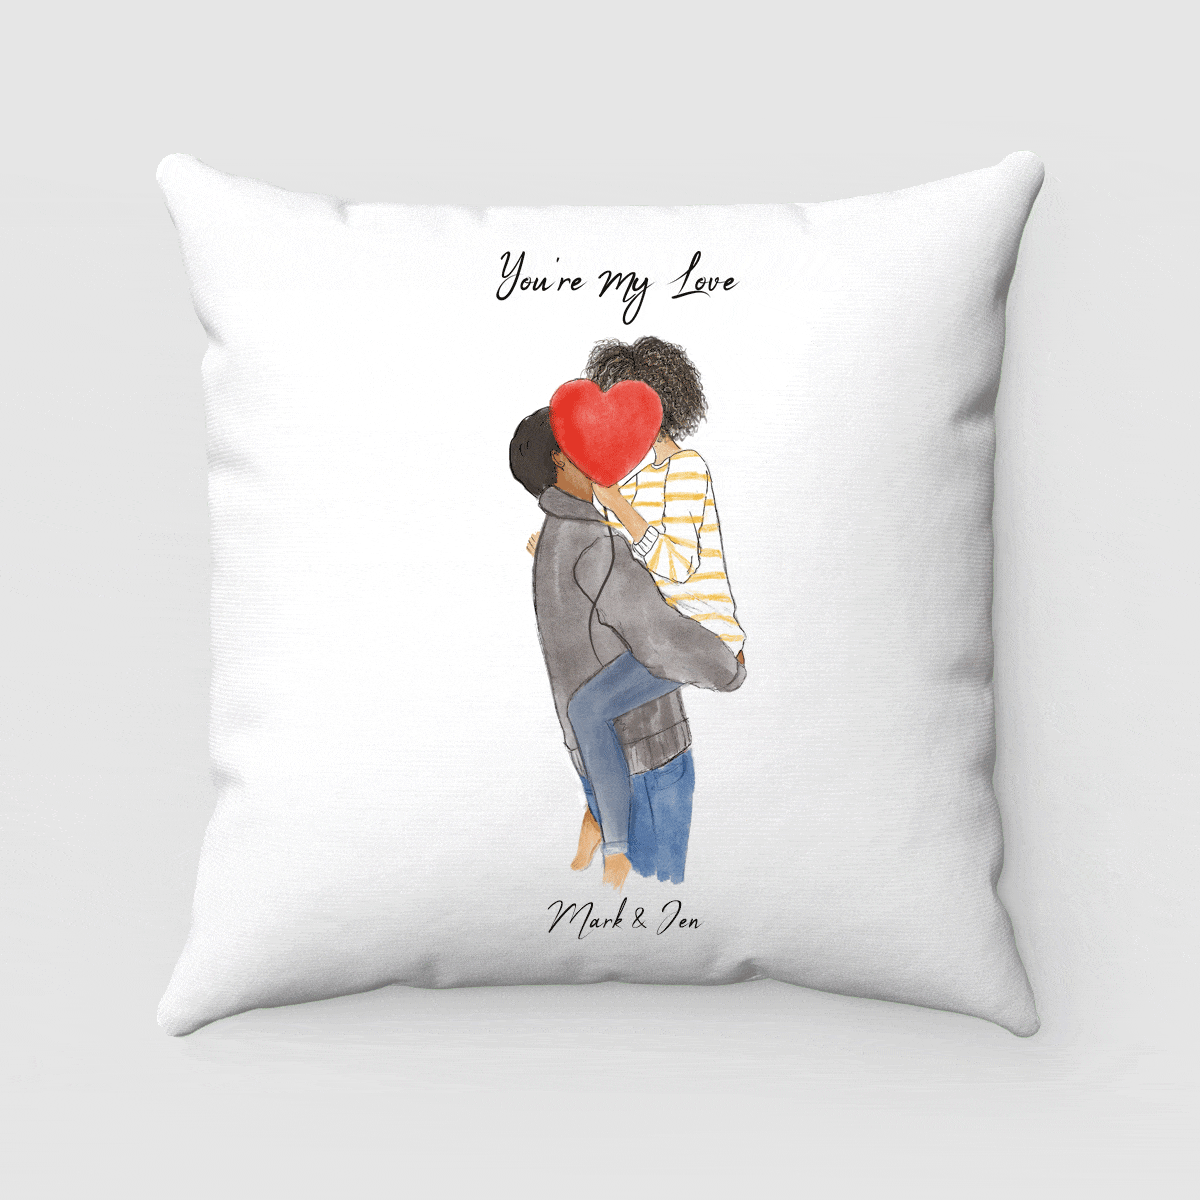 Buy GiftsOnn Personalized Pillow/Cushion, Photo Pillow Valentine  Day,Birthday,Anniversary, mothers's Day, Father's Day,Raakhi (12x12, White)  Online at Low Prices in India - Amazon.in